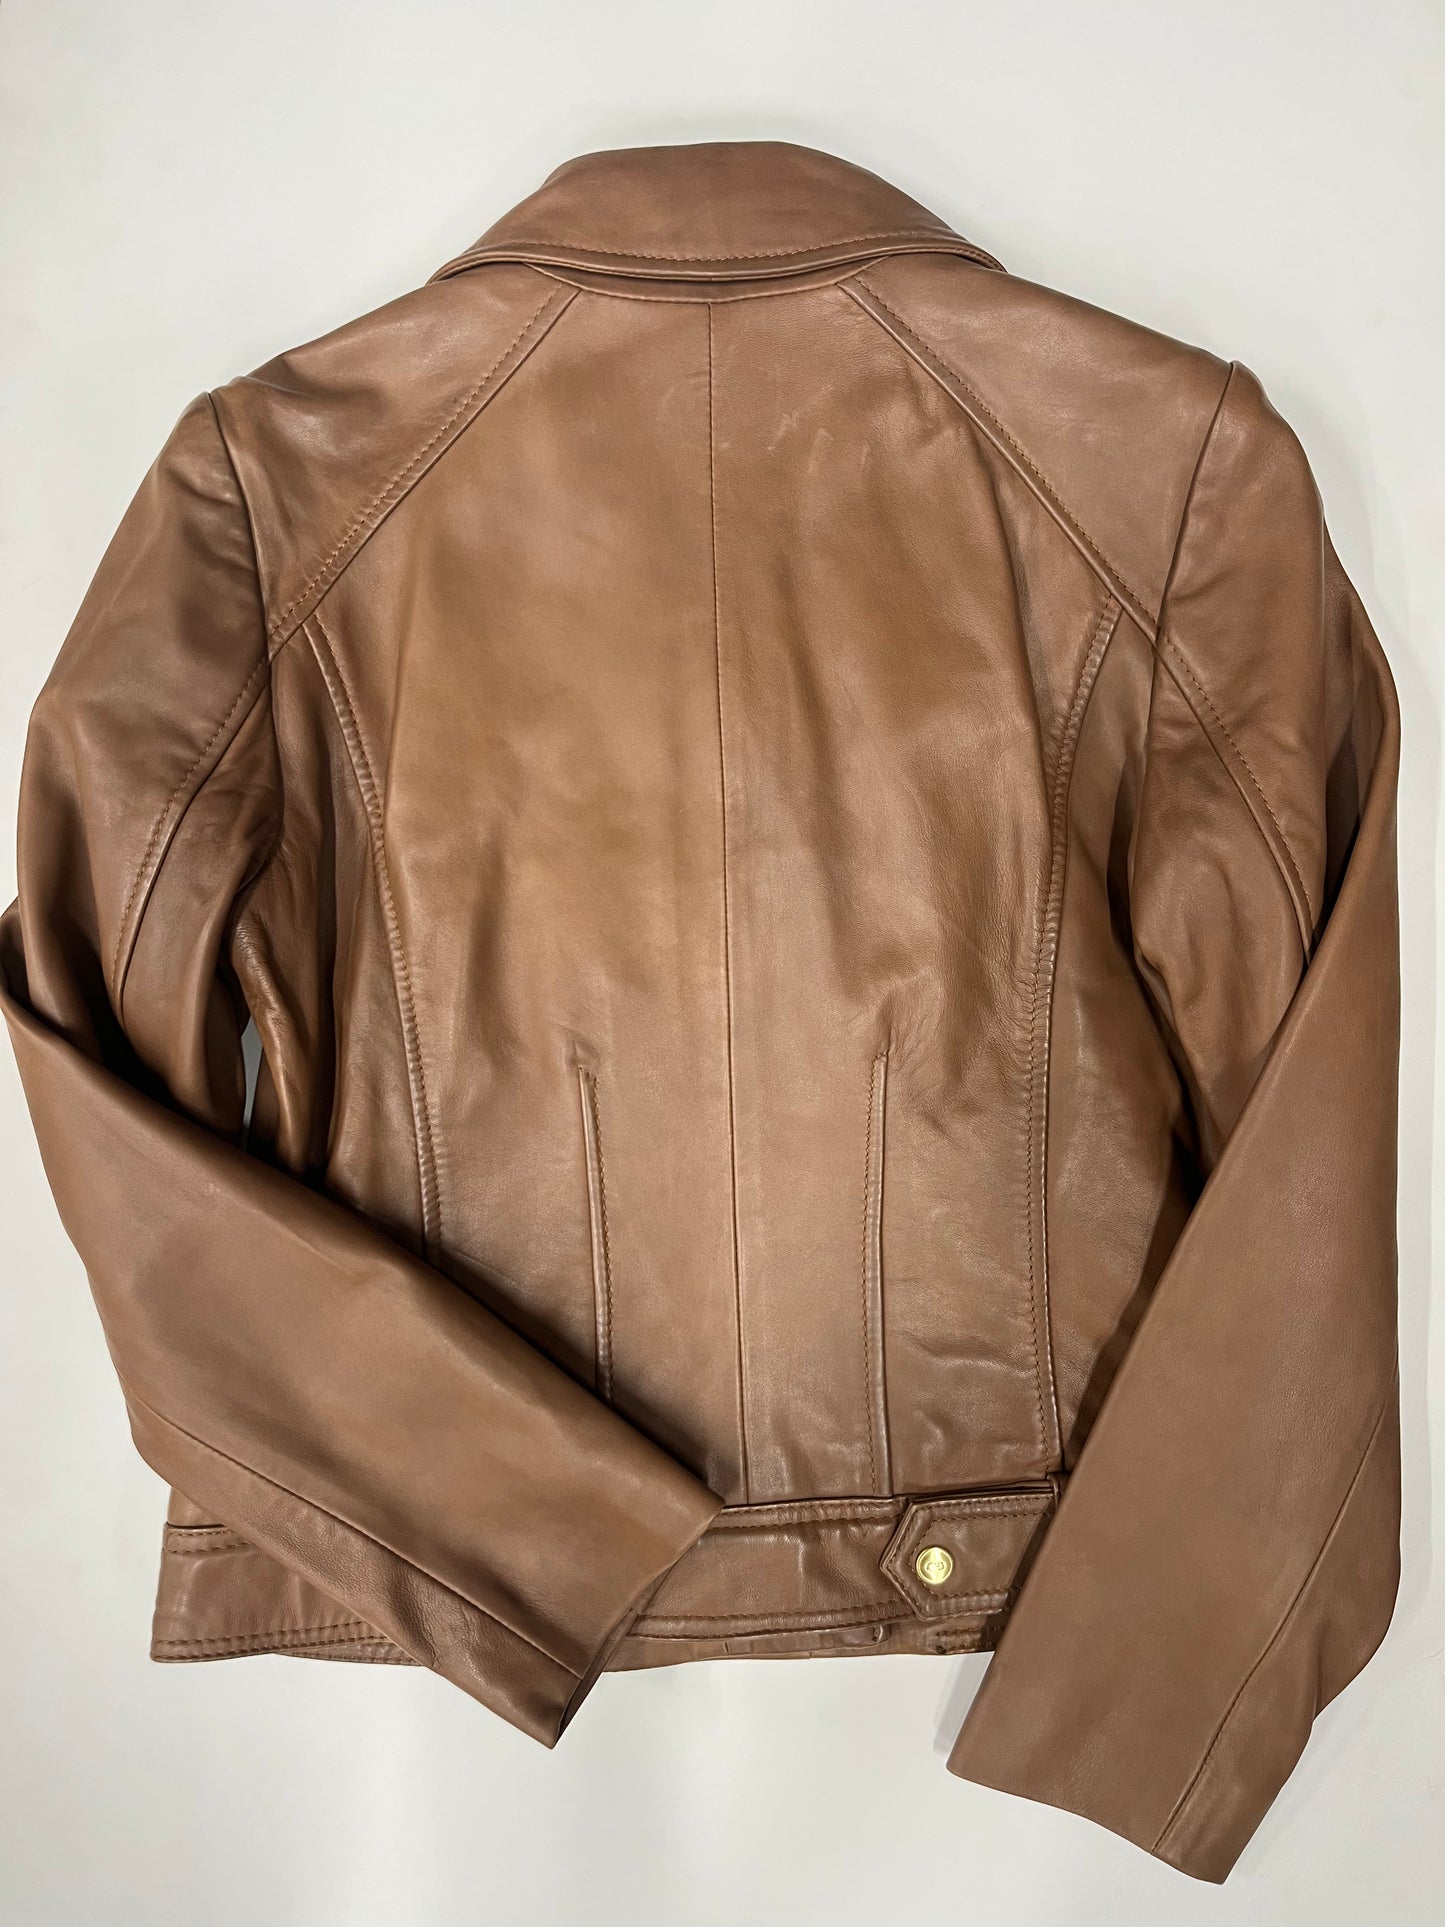 Cole Haan Full Zip Leather Jacket Brown NWT Size M